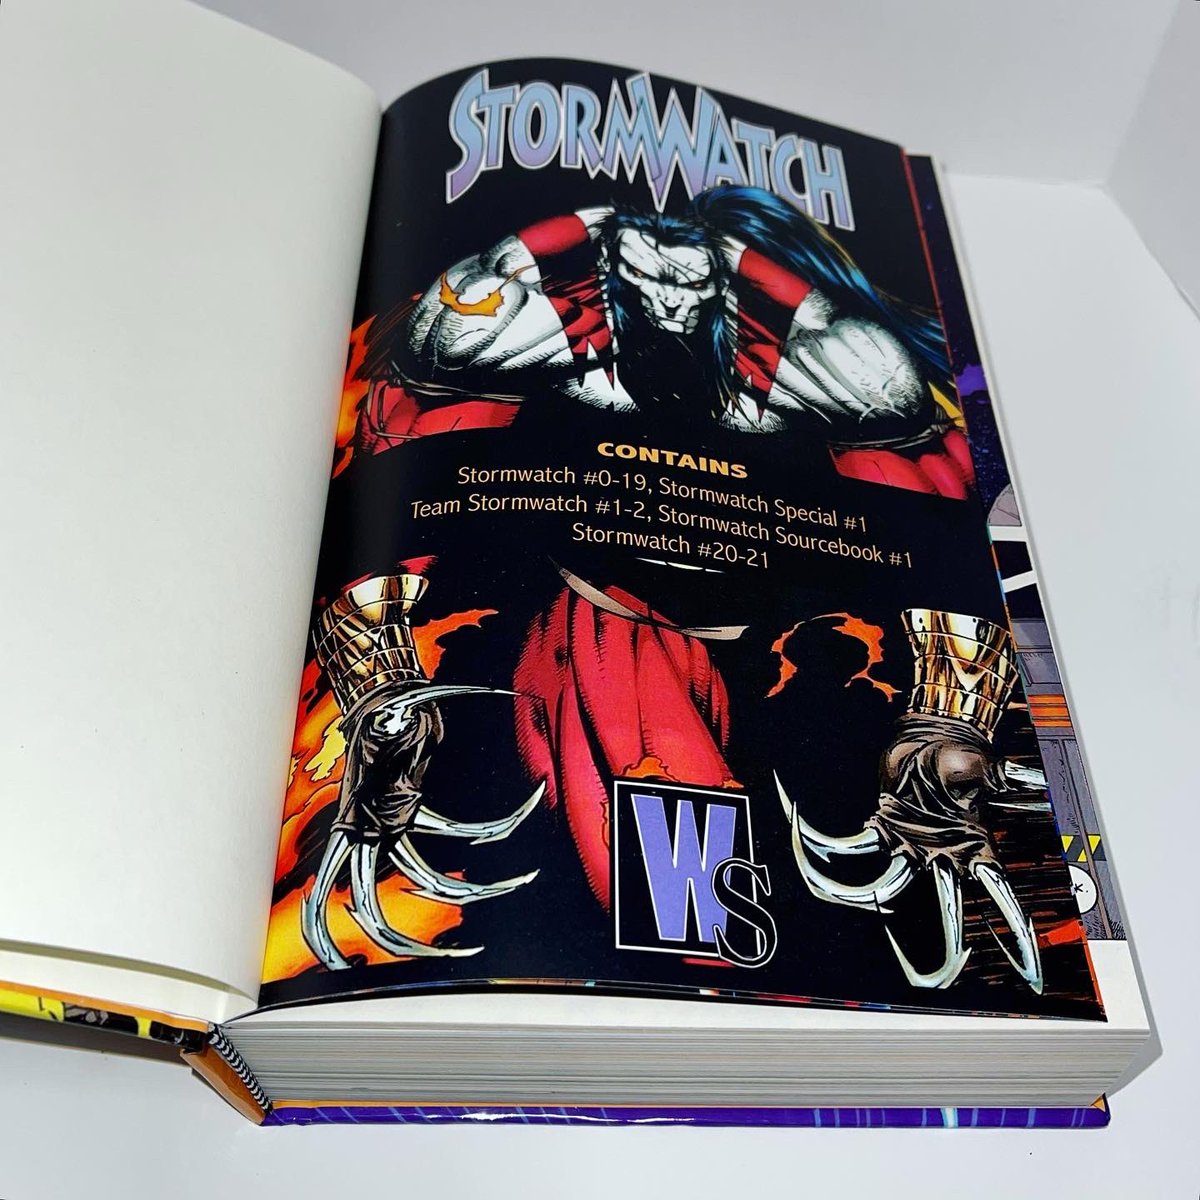 Meet Amos, a die-hard fan of Wildstorm Comics! We recently created 4 custom hardcovers for him, bringing his collection to the next level.

#ComicBinding #CustomBound #StormwatchComics #WildstormComics #ComicBookCollector  #GraphicDesign #PassionateFans